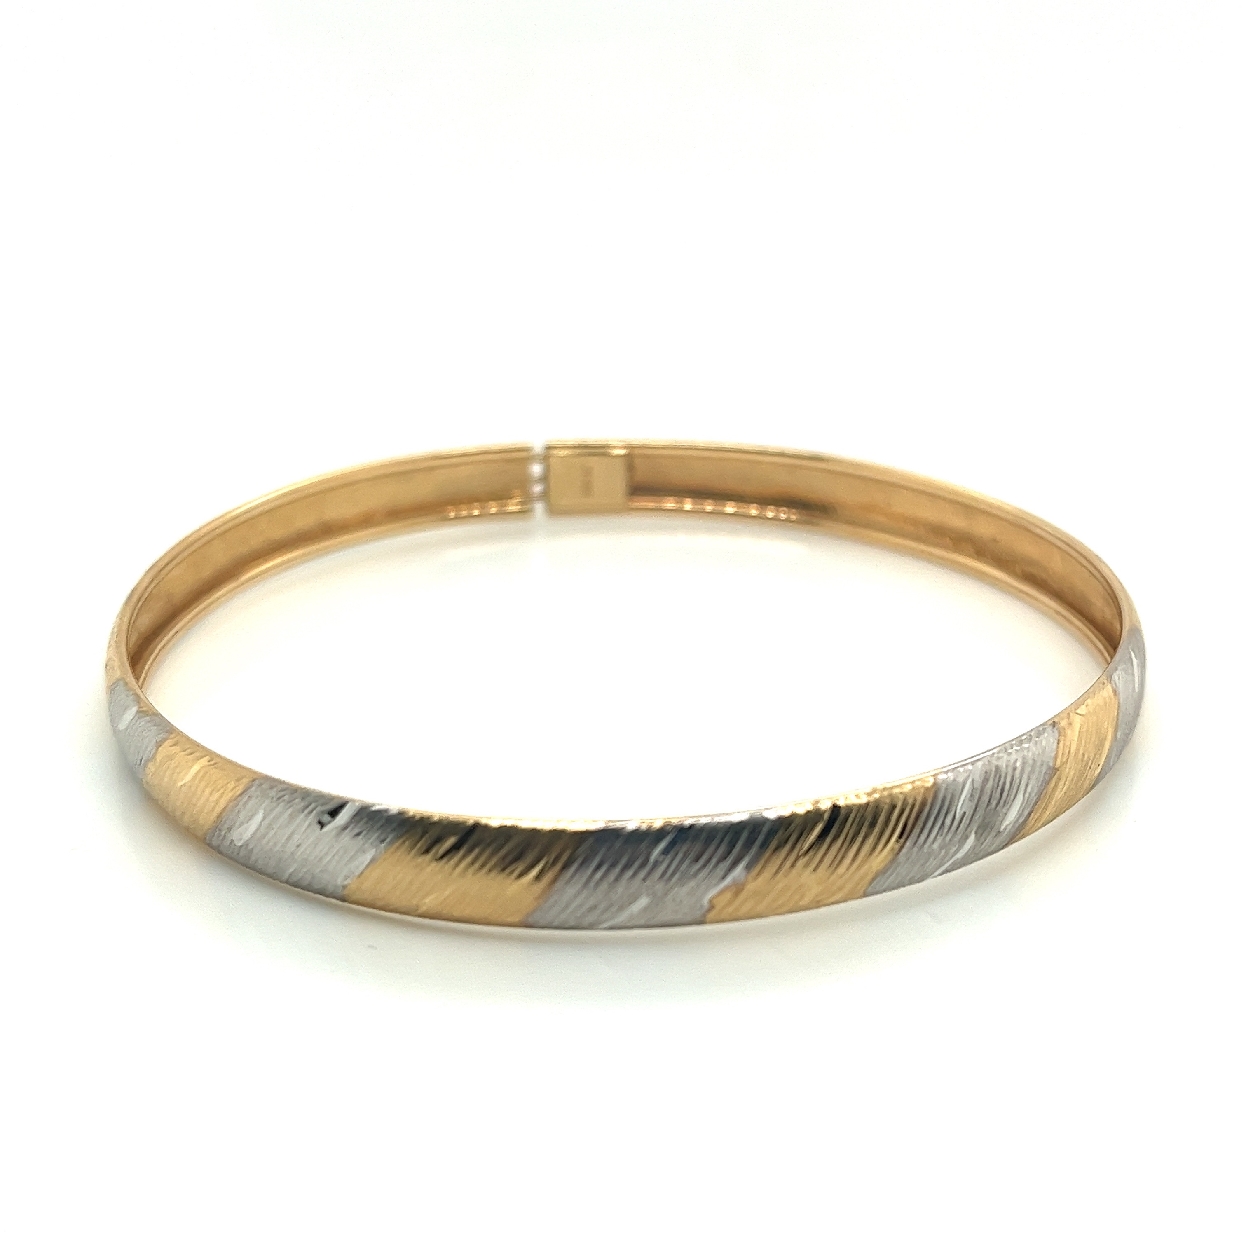 10K Two Toned White and Yellow Gold Tension Bangle with Safety Clasp 

Fits Standard 7-8 Inch Wrist Size